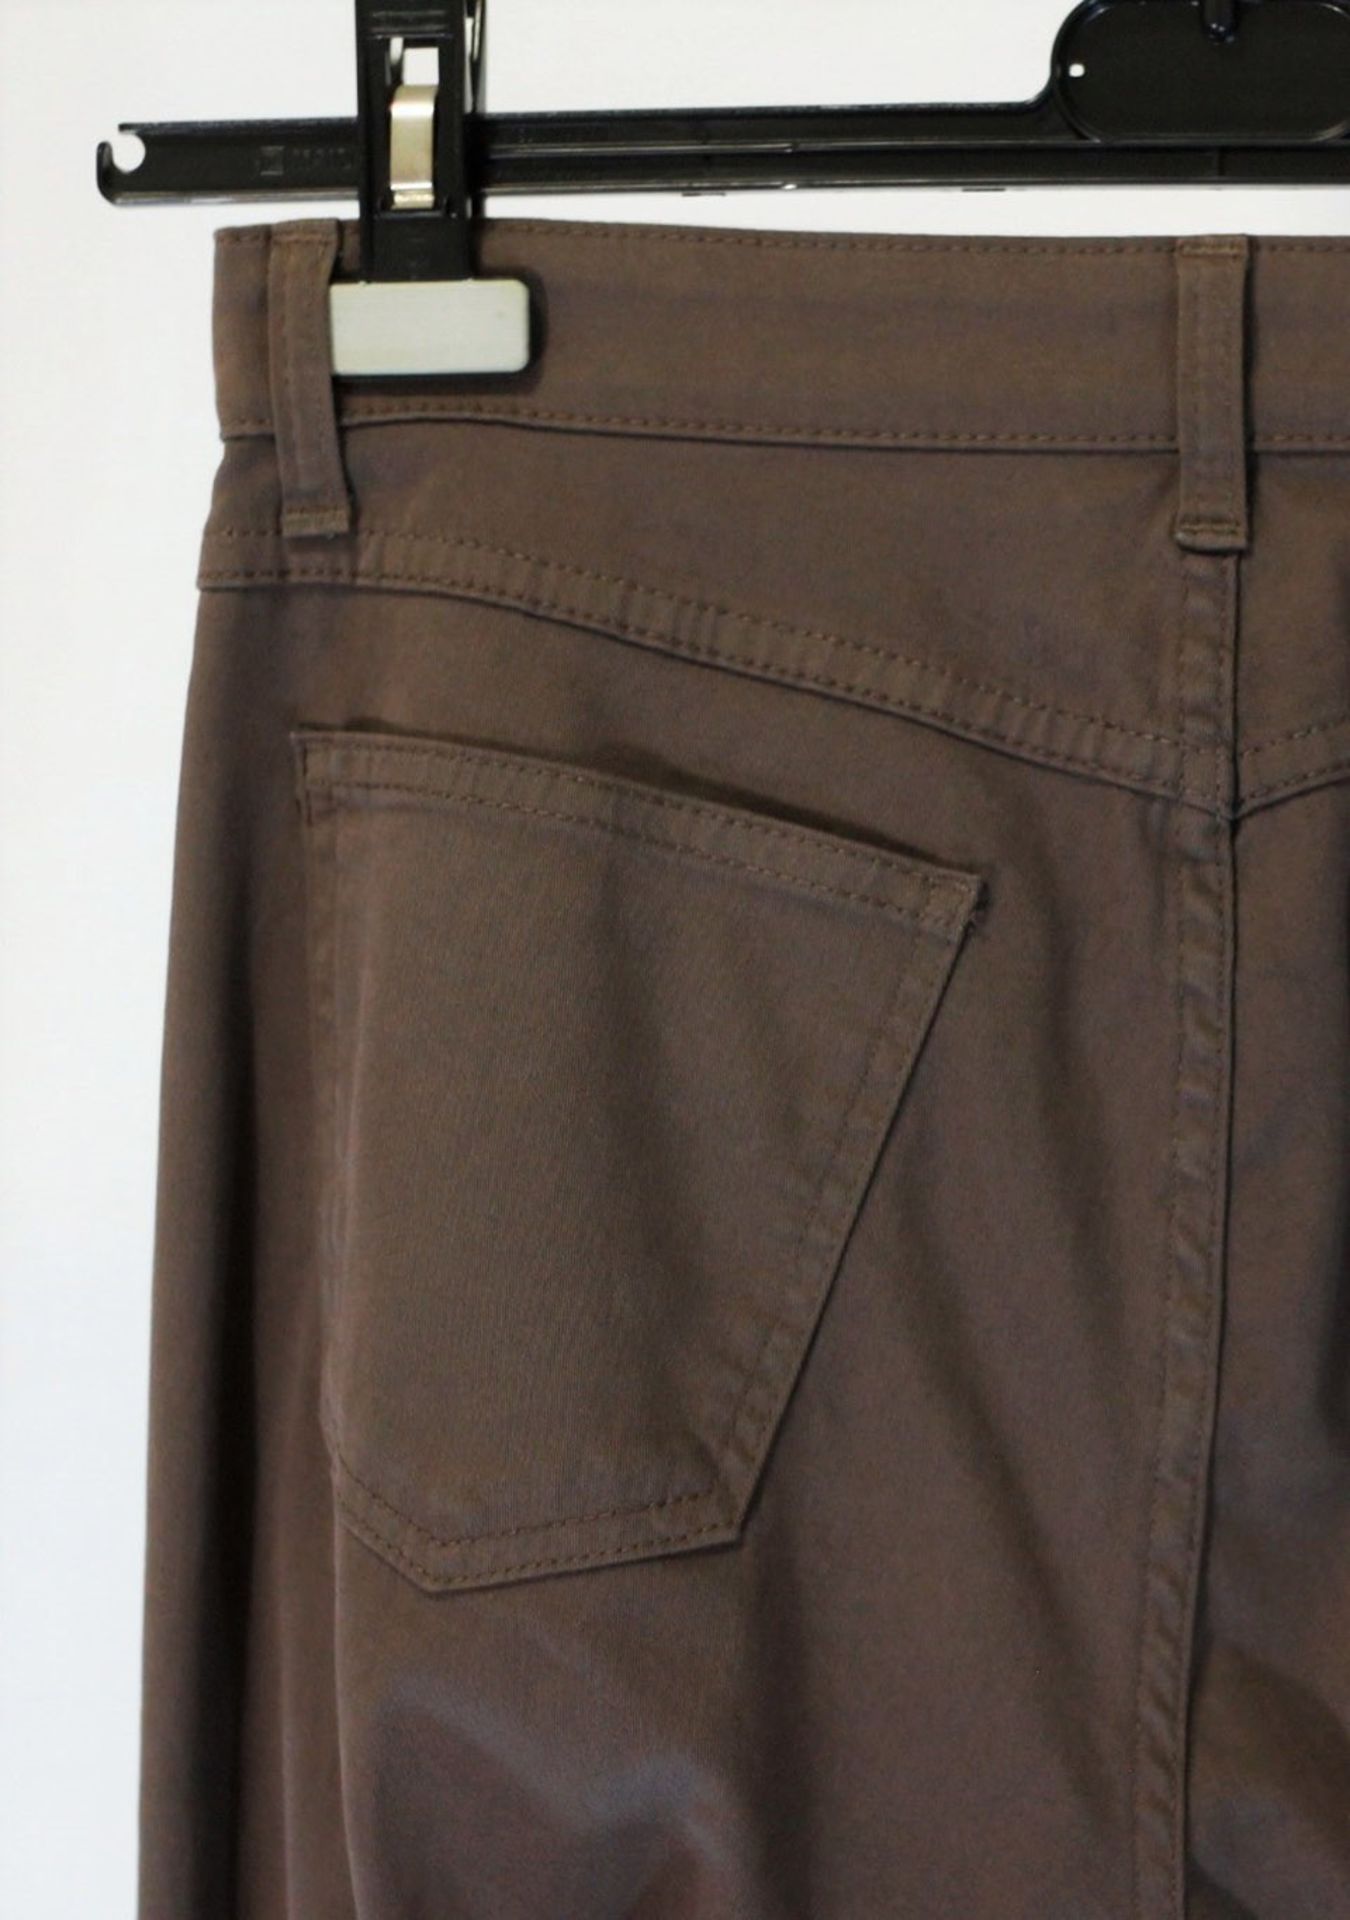 1 x Agnona Brown Jeans - Size: 12 - Material: 98% Cotton, 2% Elastane. Lining 100% Cotton - From a - Image 5 of 6